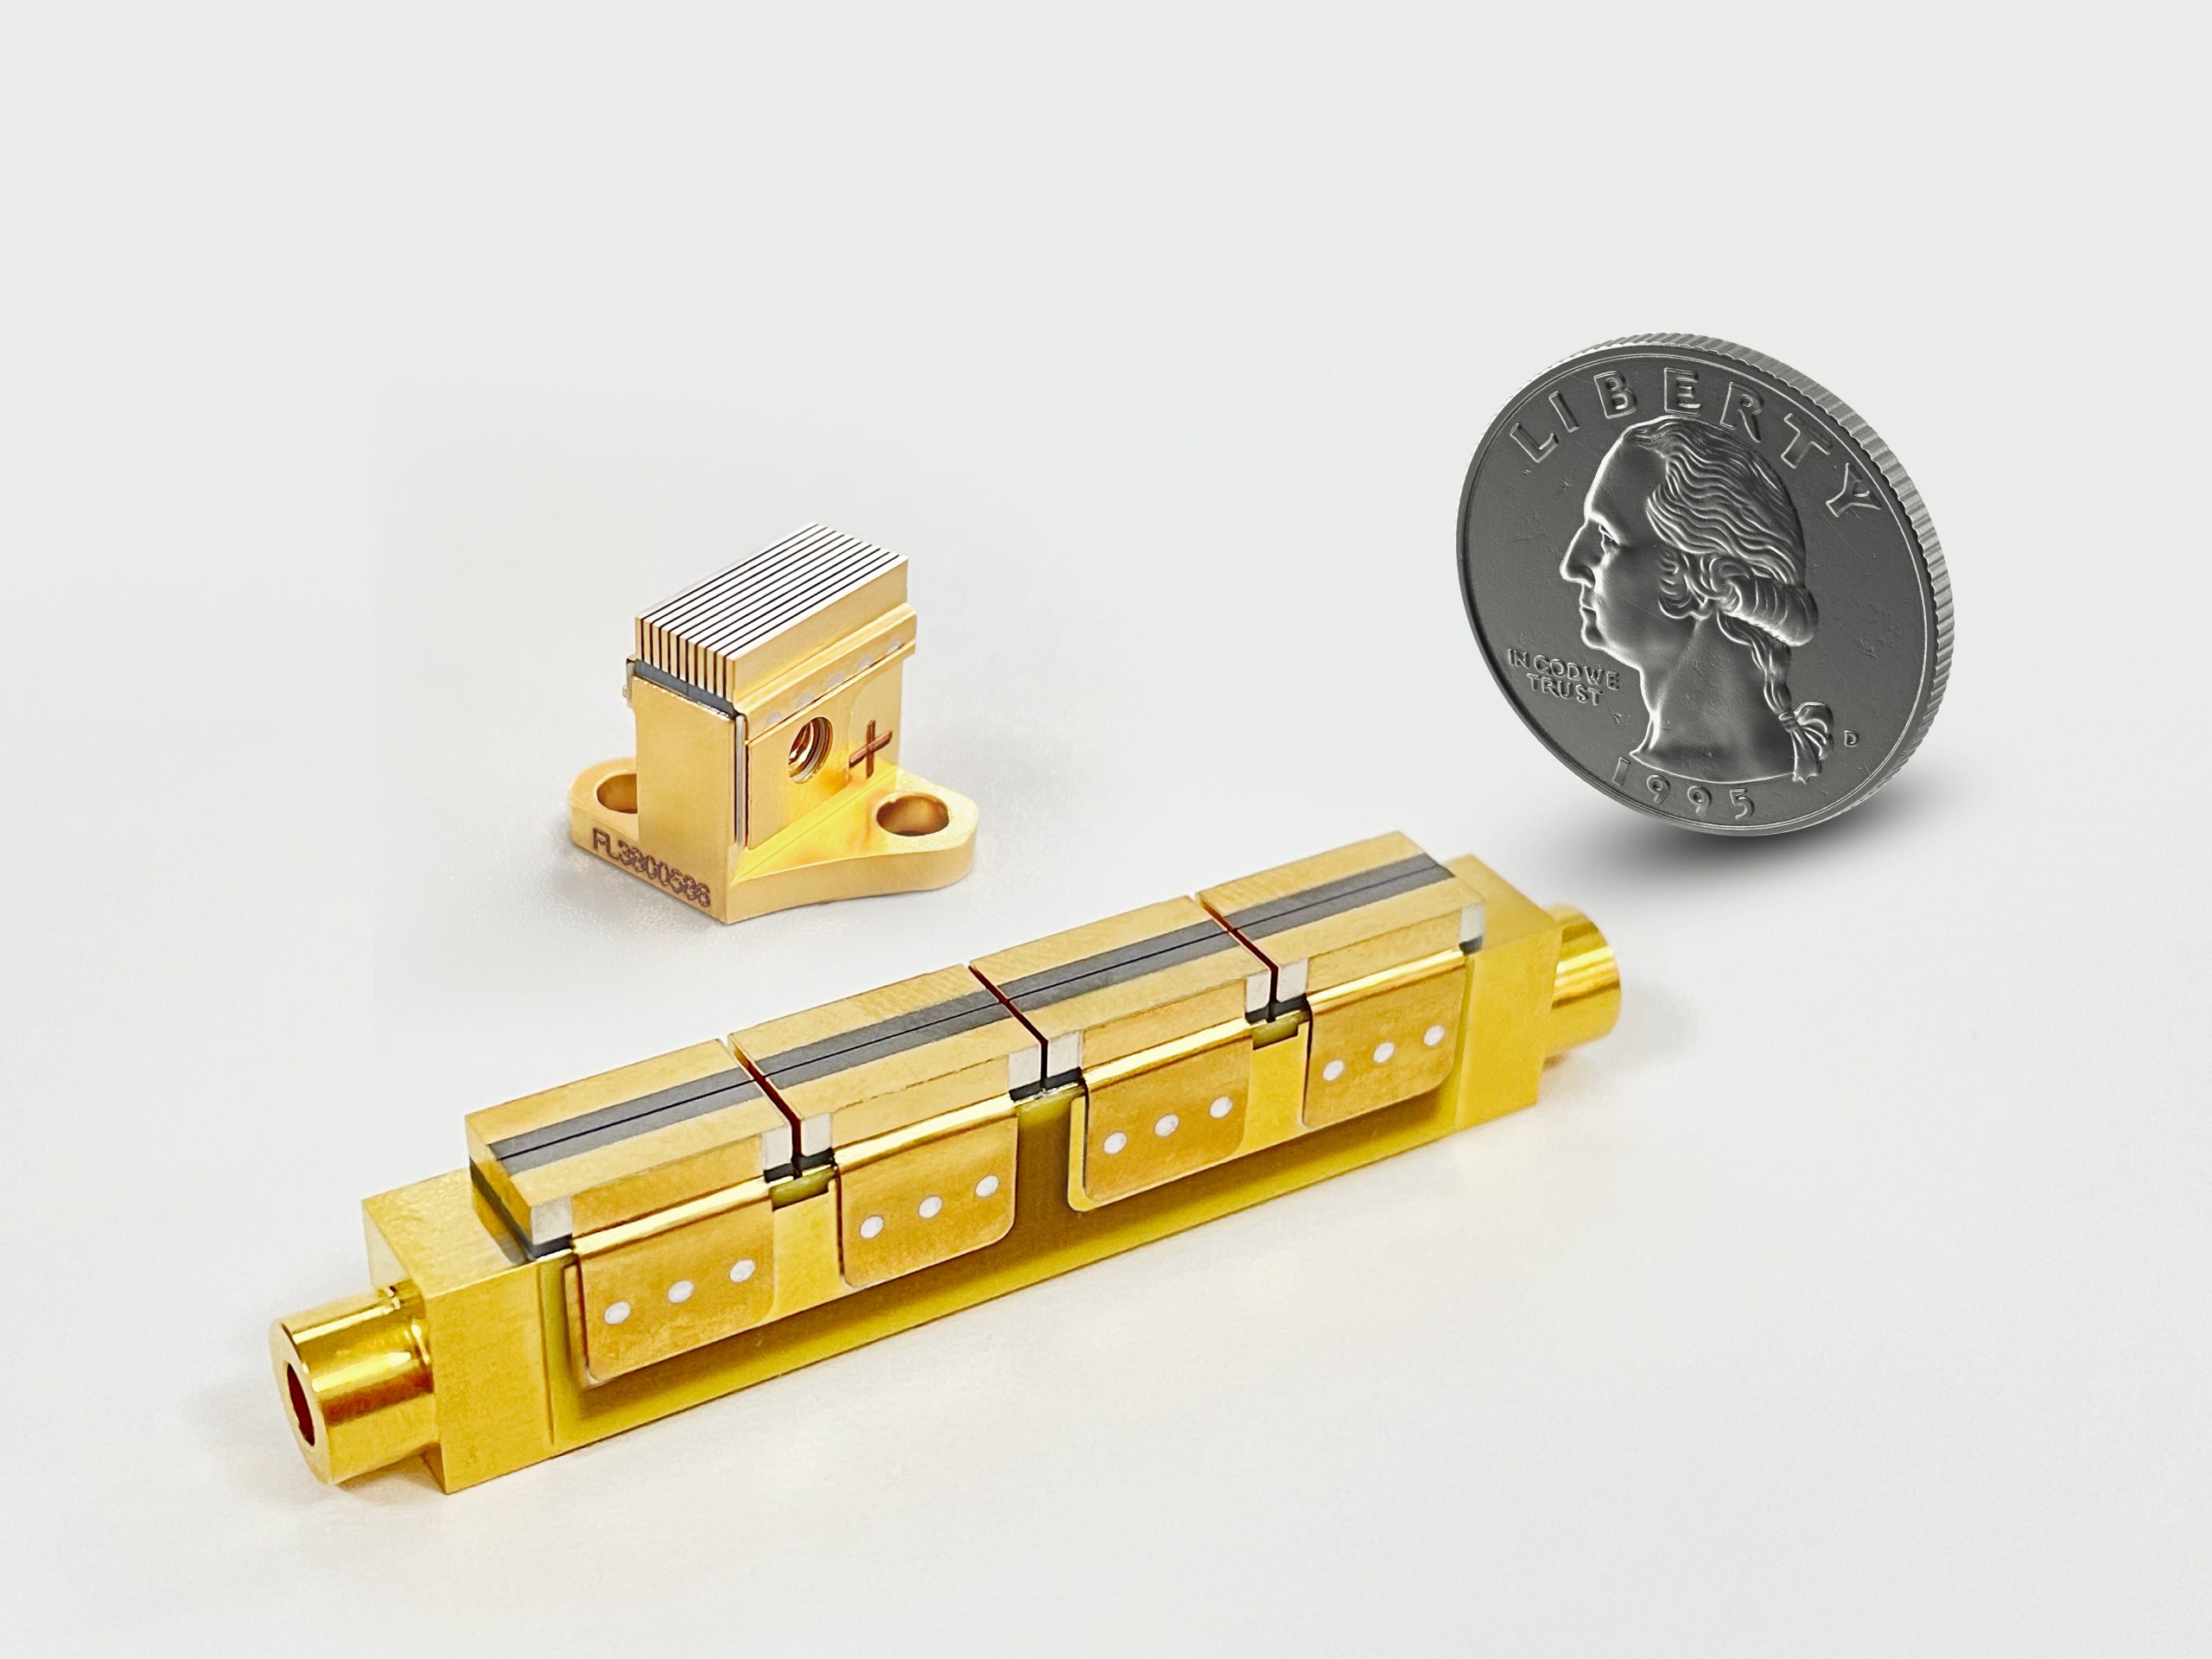 New Product Release | Focuslight Technologies Releases Miniaturized High-Power Diode Laser Stacks GS09 and GA03